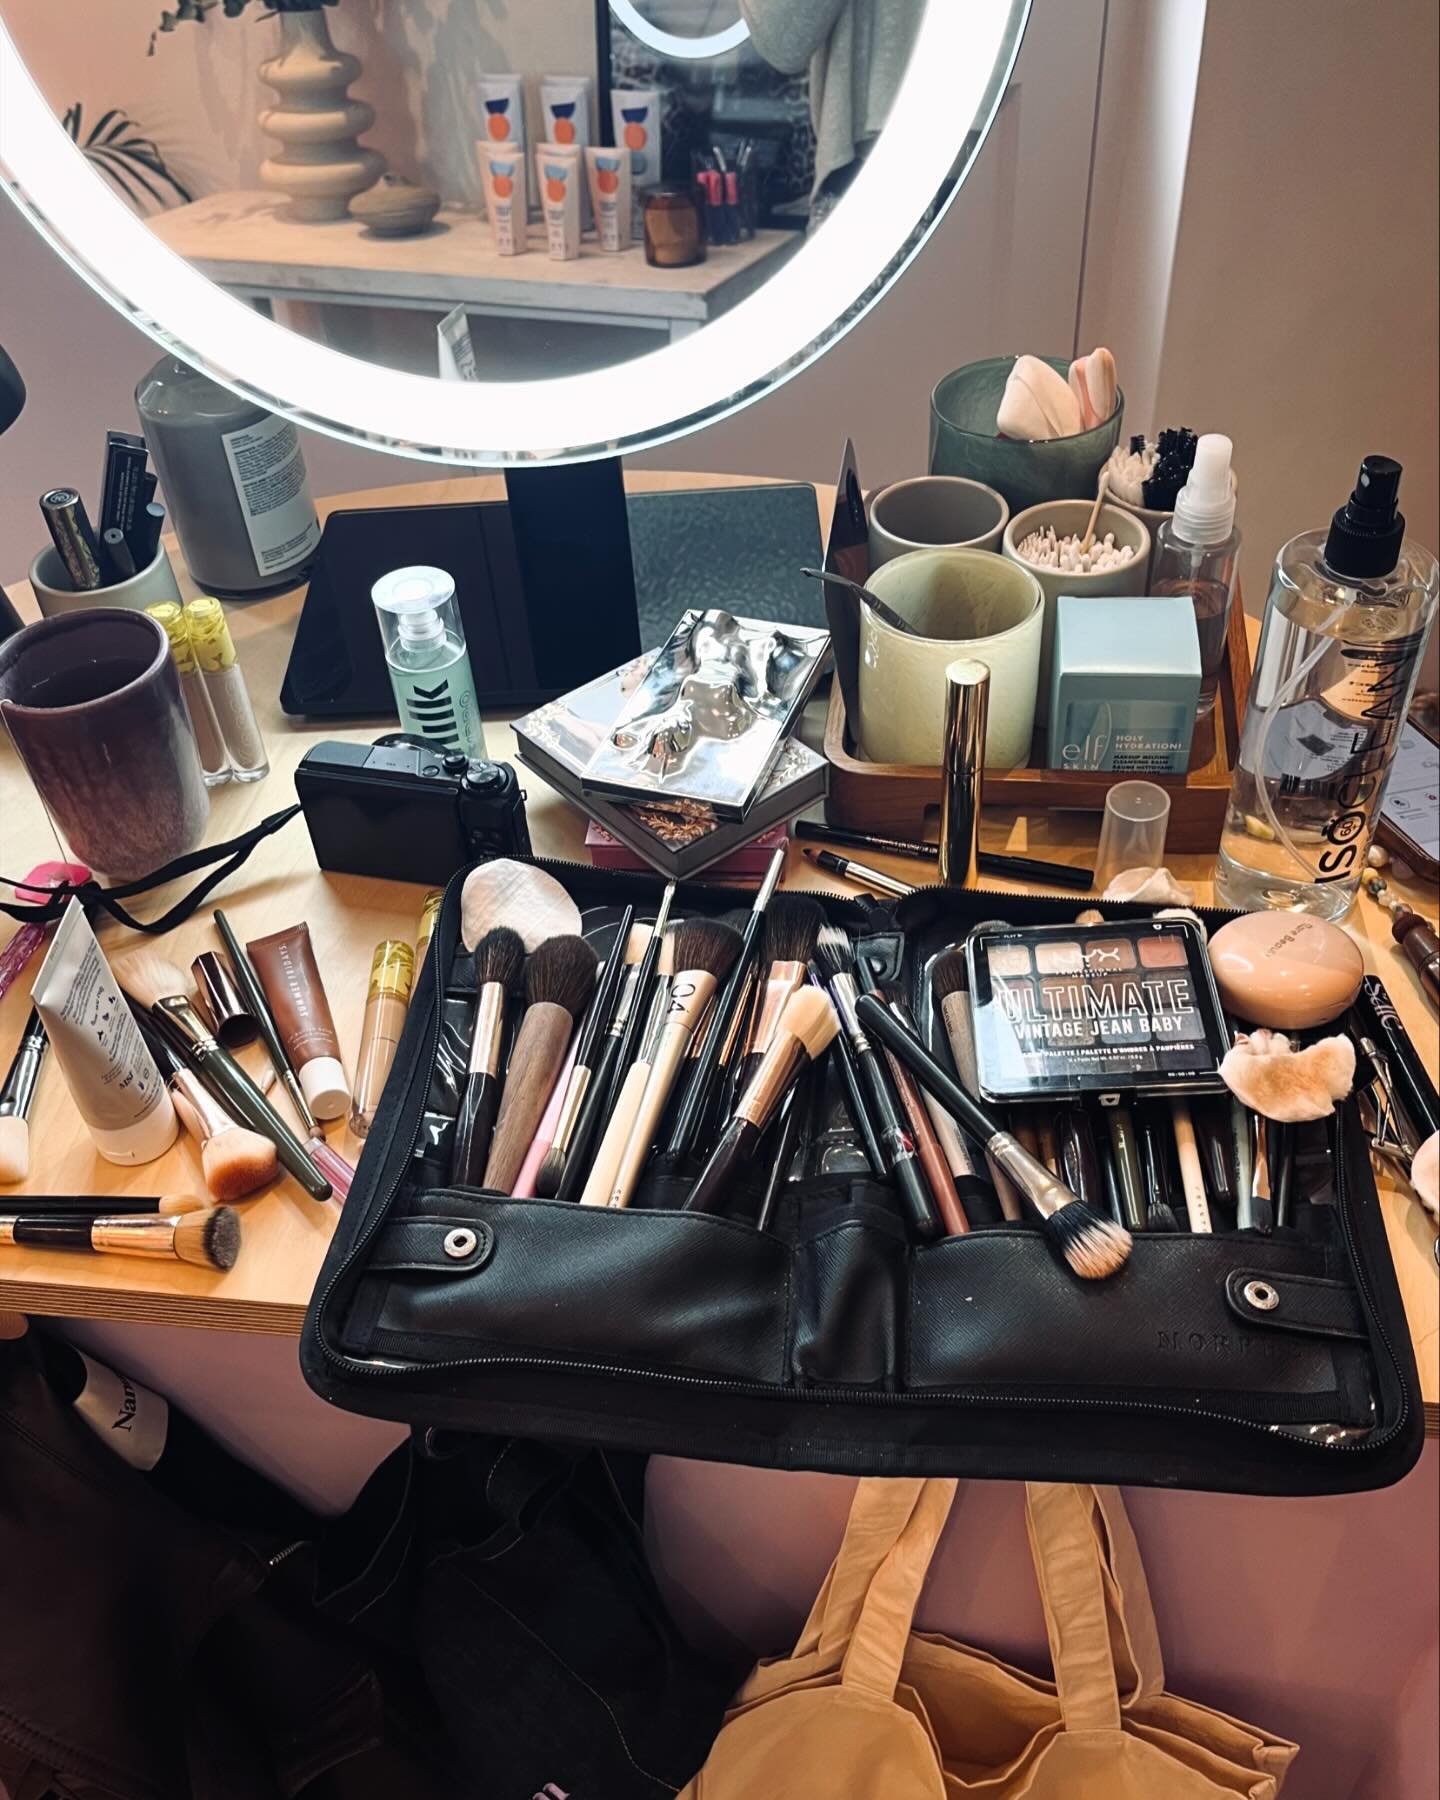 When your makeup station reflects chaos but your heart screams &lsquo;artist at work&rsquo; 🎨

📽️New reel coming tomorrow 

💙 Book Beam and embrace the mess, it&rsquo;s just your face having a party. #bemorebeam